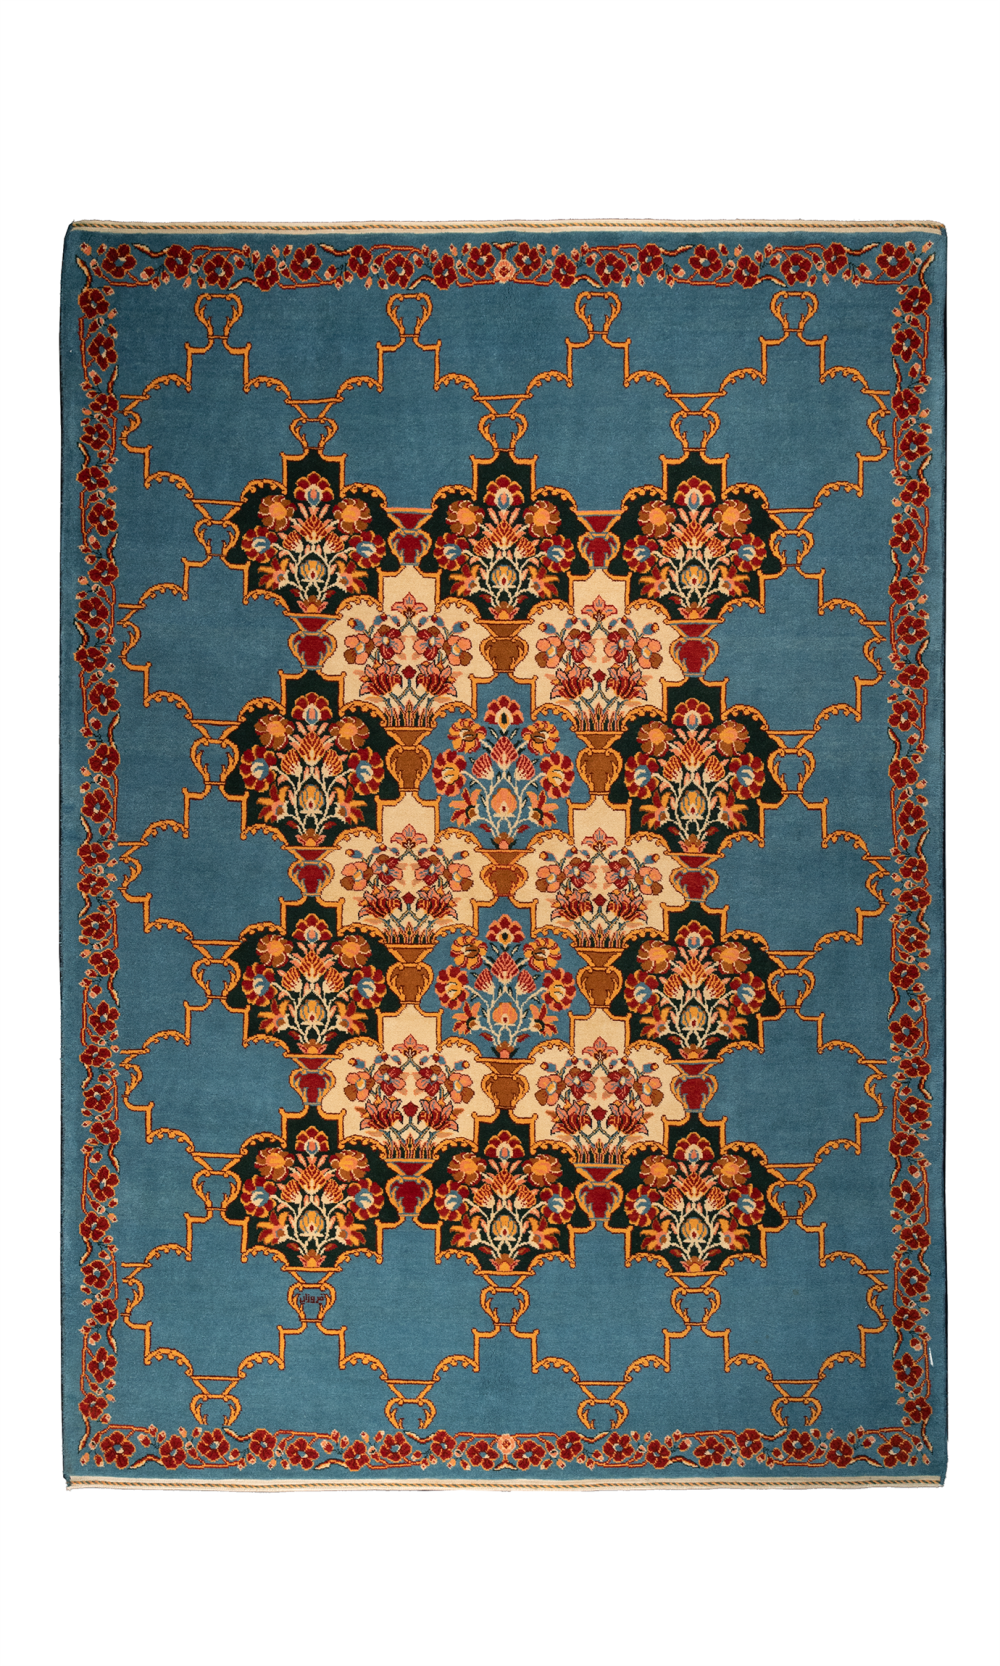 HANDMADE RUG IN WOOL & TURQUOISE COLOR WITH VEGETABLE DYED ISFAHAN